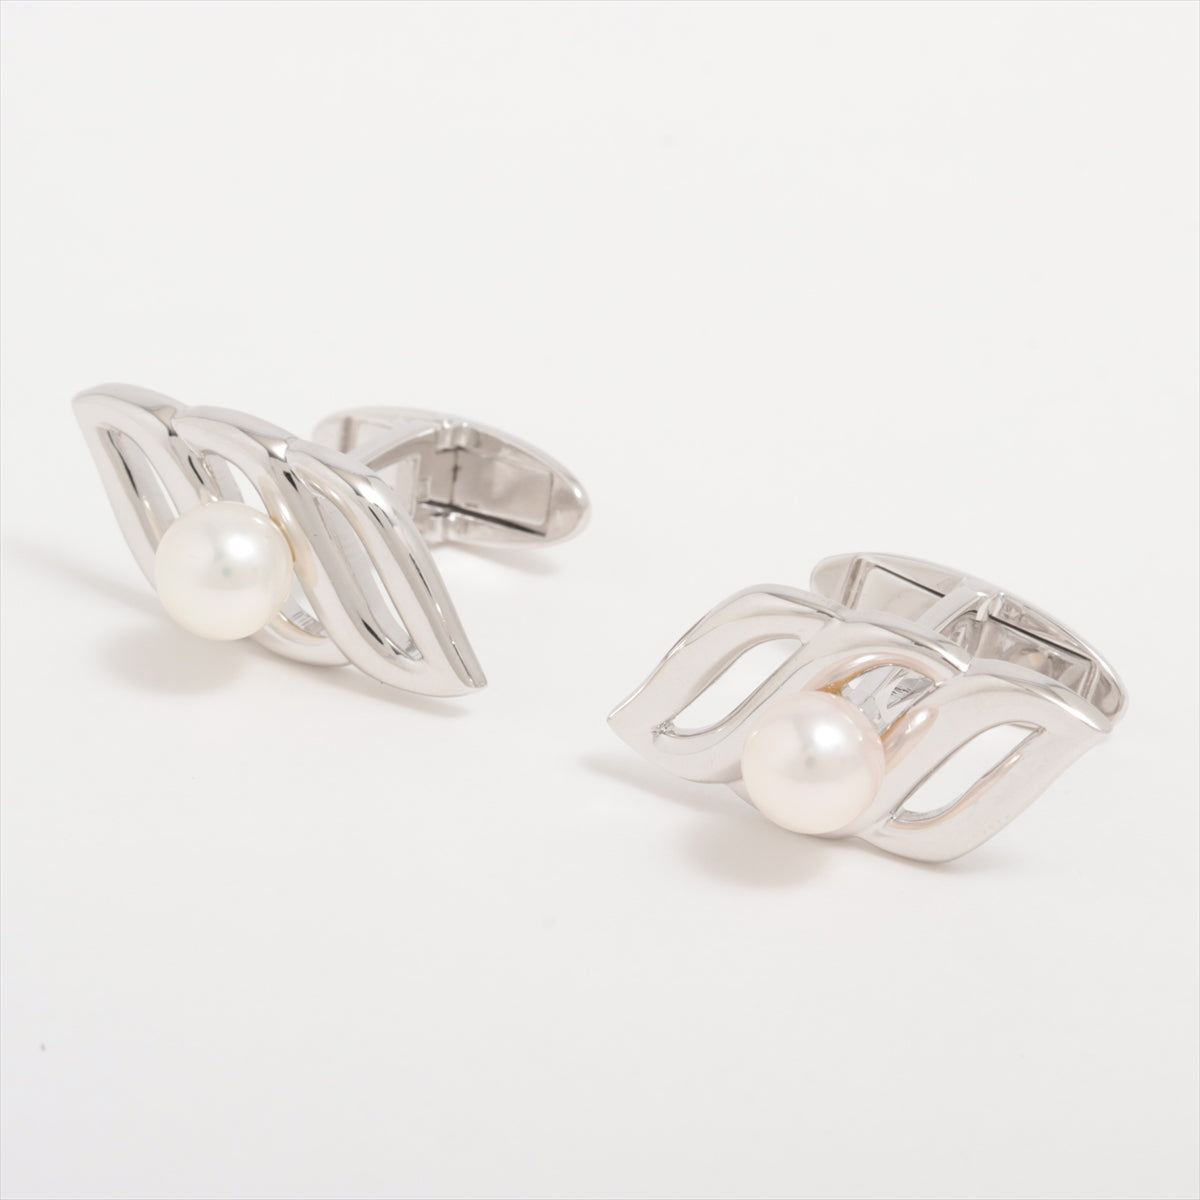 Mikimoto Pearl Cuffs SV 8.9g Approx. 6.0 mm to 6.5 mm NHK engraved